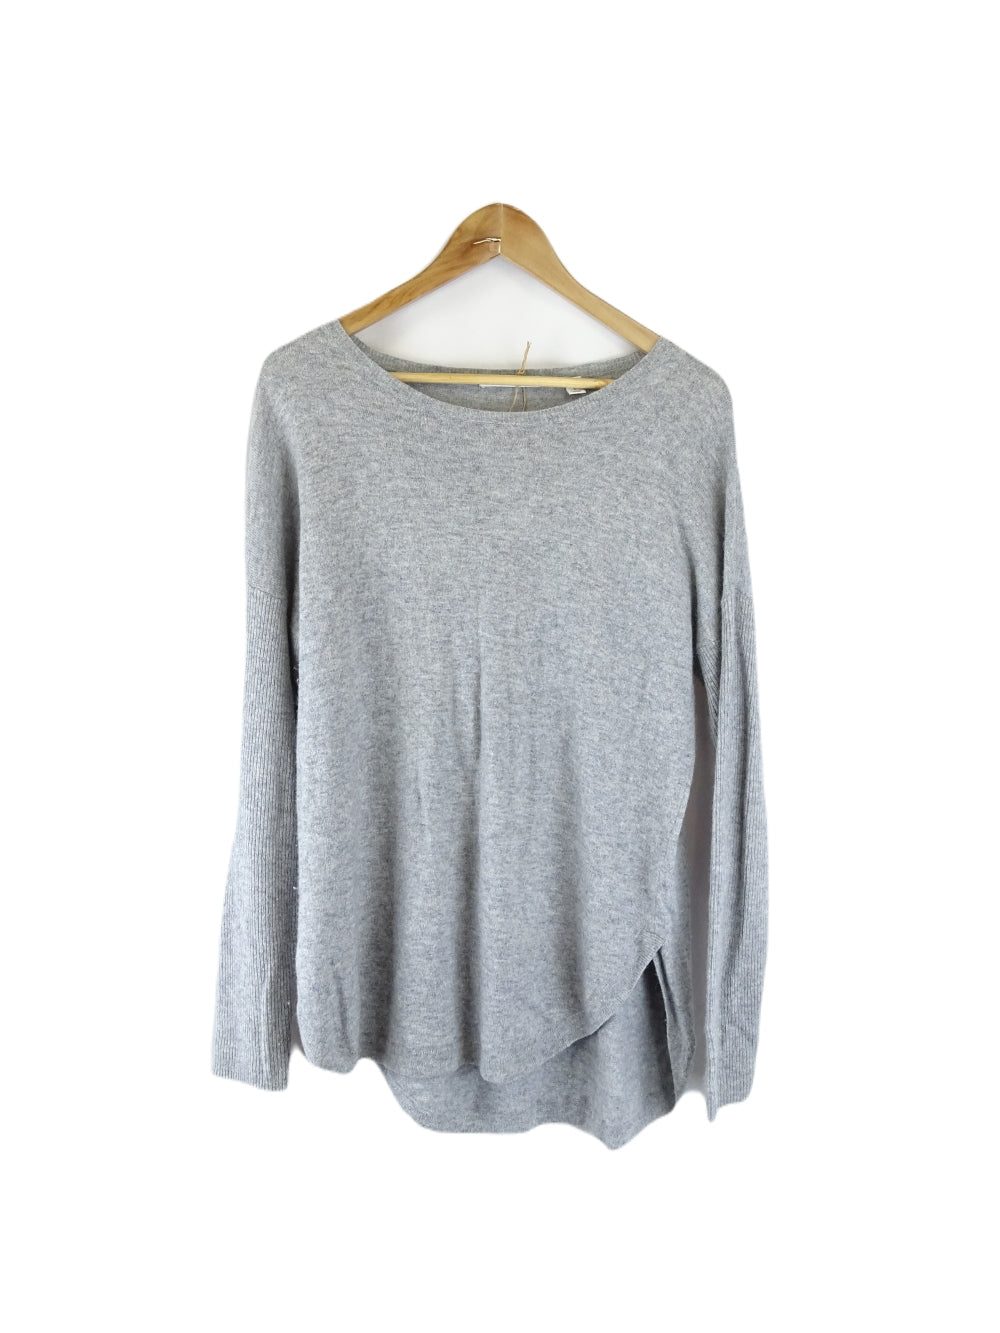 Country Road Grey Jumper L